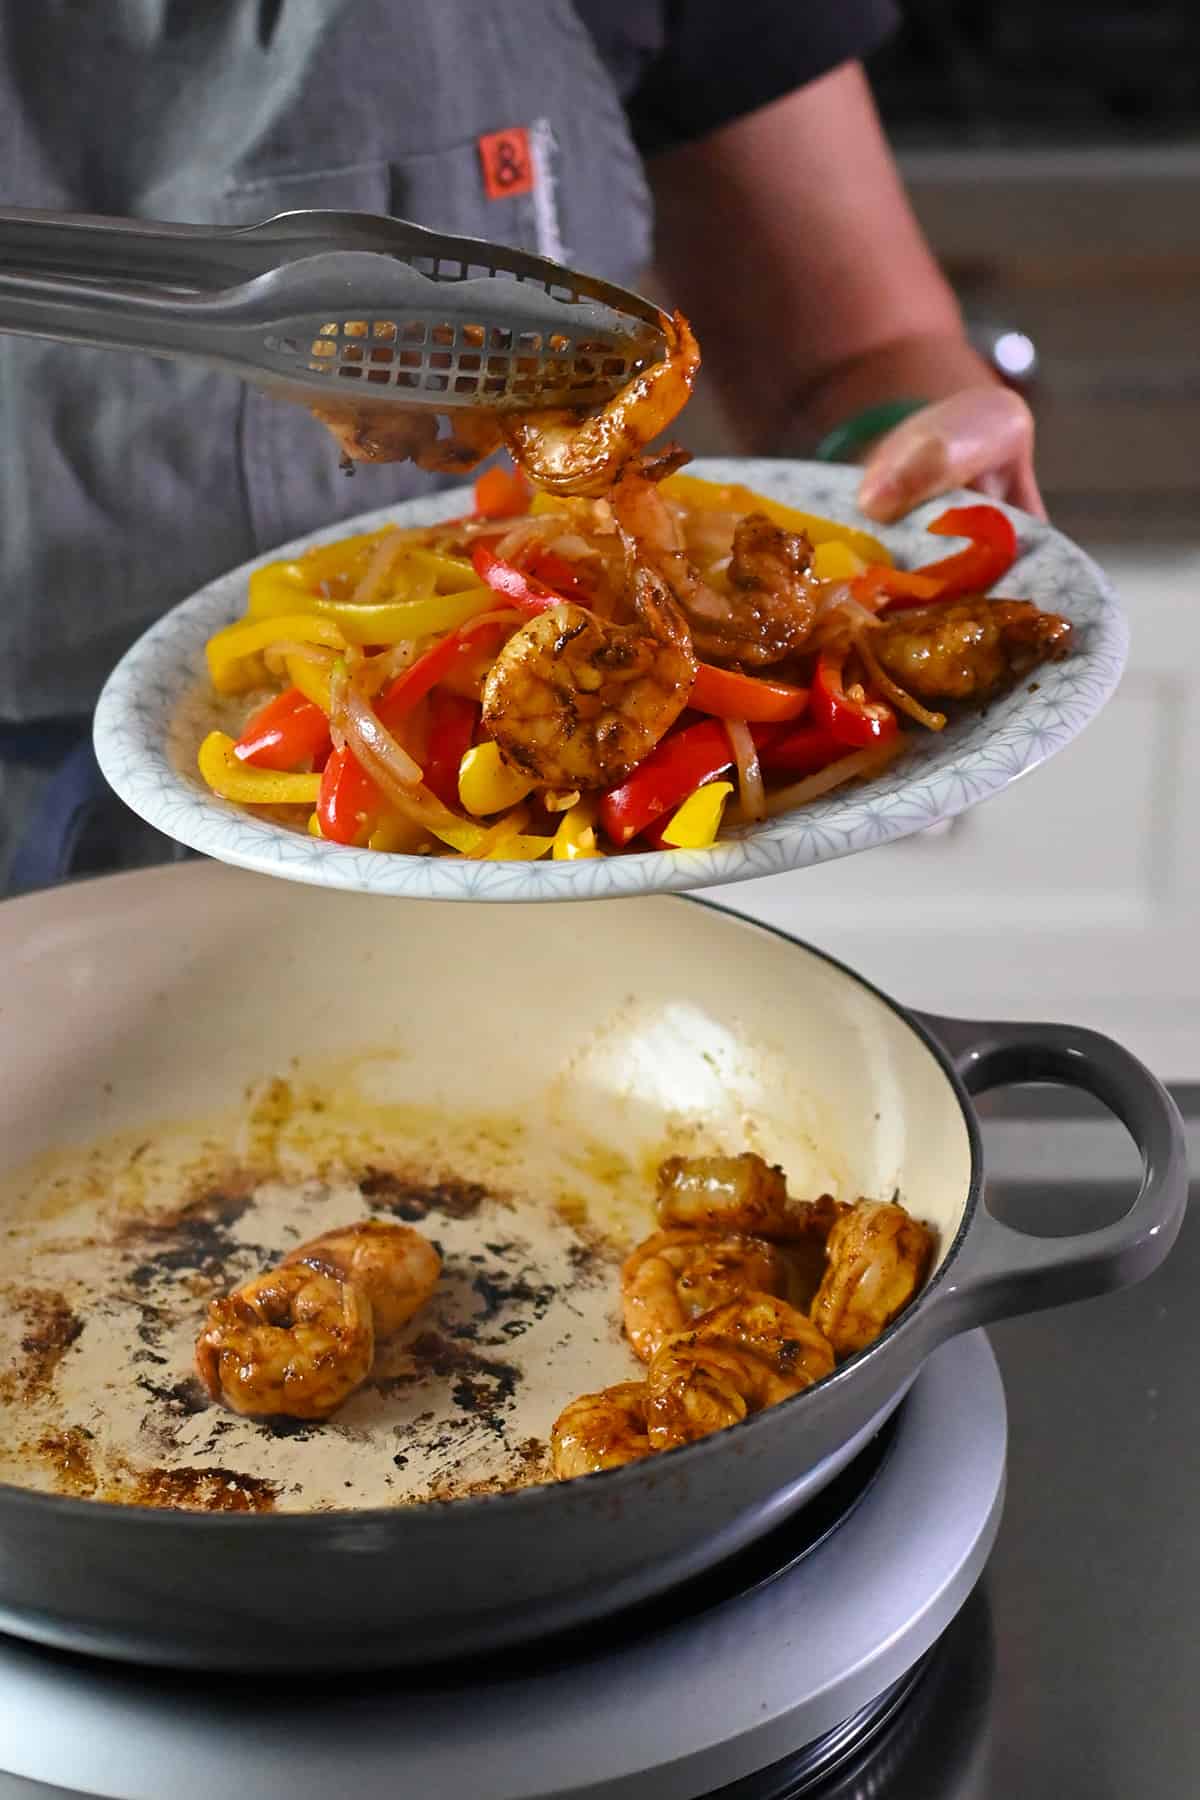 Transferring the cooked shrimp from the skillet to the plate with cooked fajita vegetables.